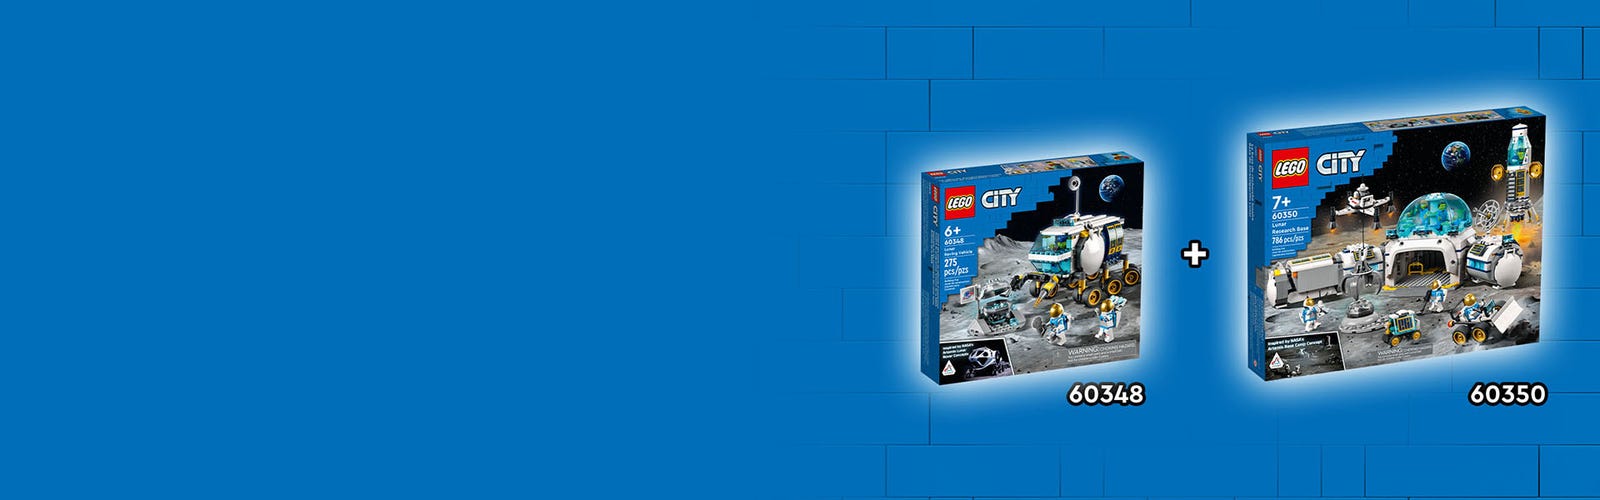 LEGO City Space Port Lunar Research Base 60350 by LEGO Systems Inc.